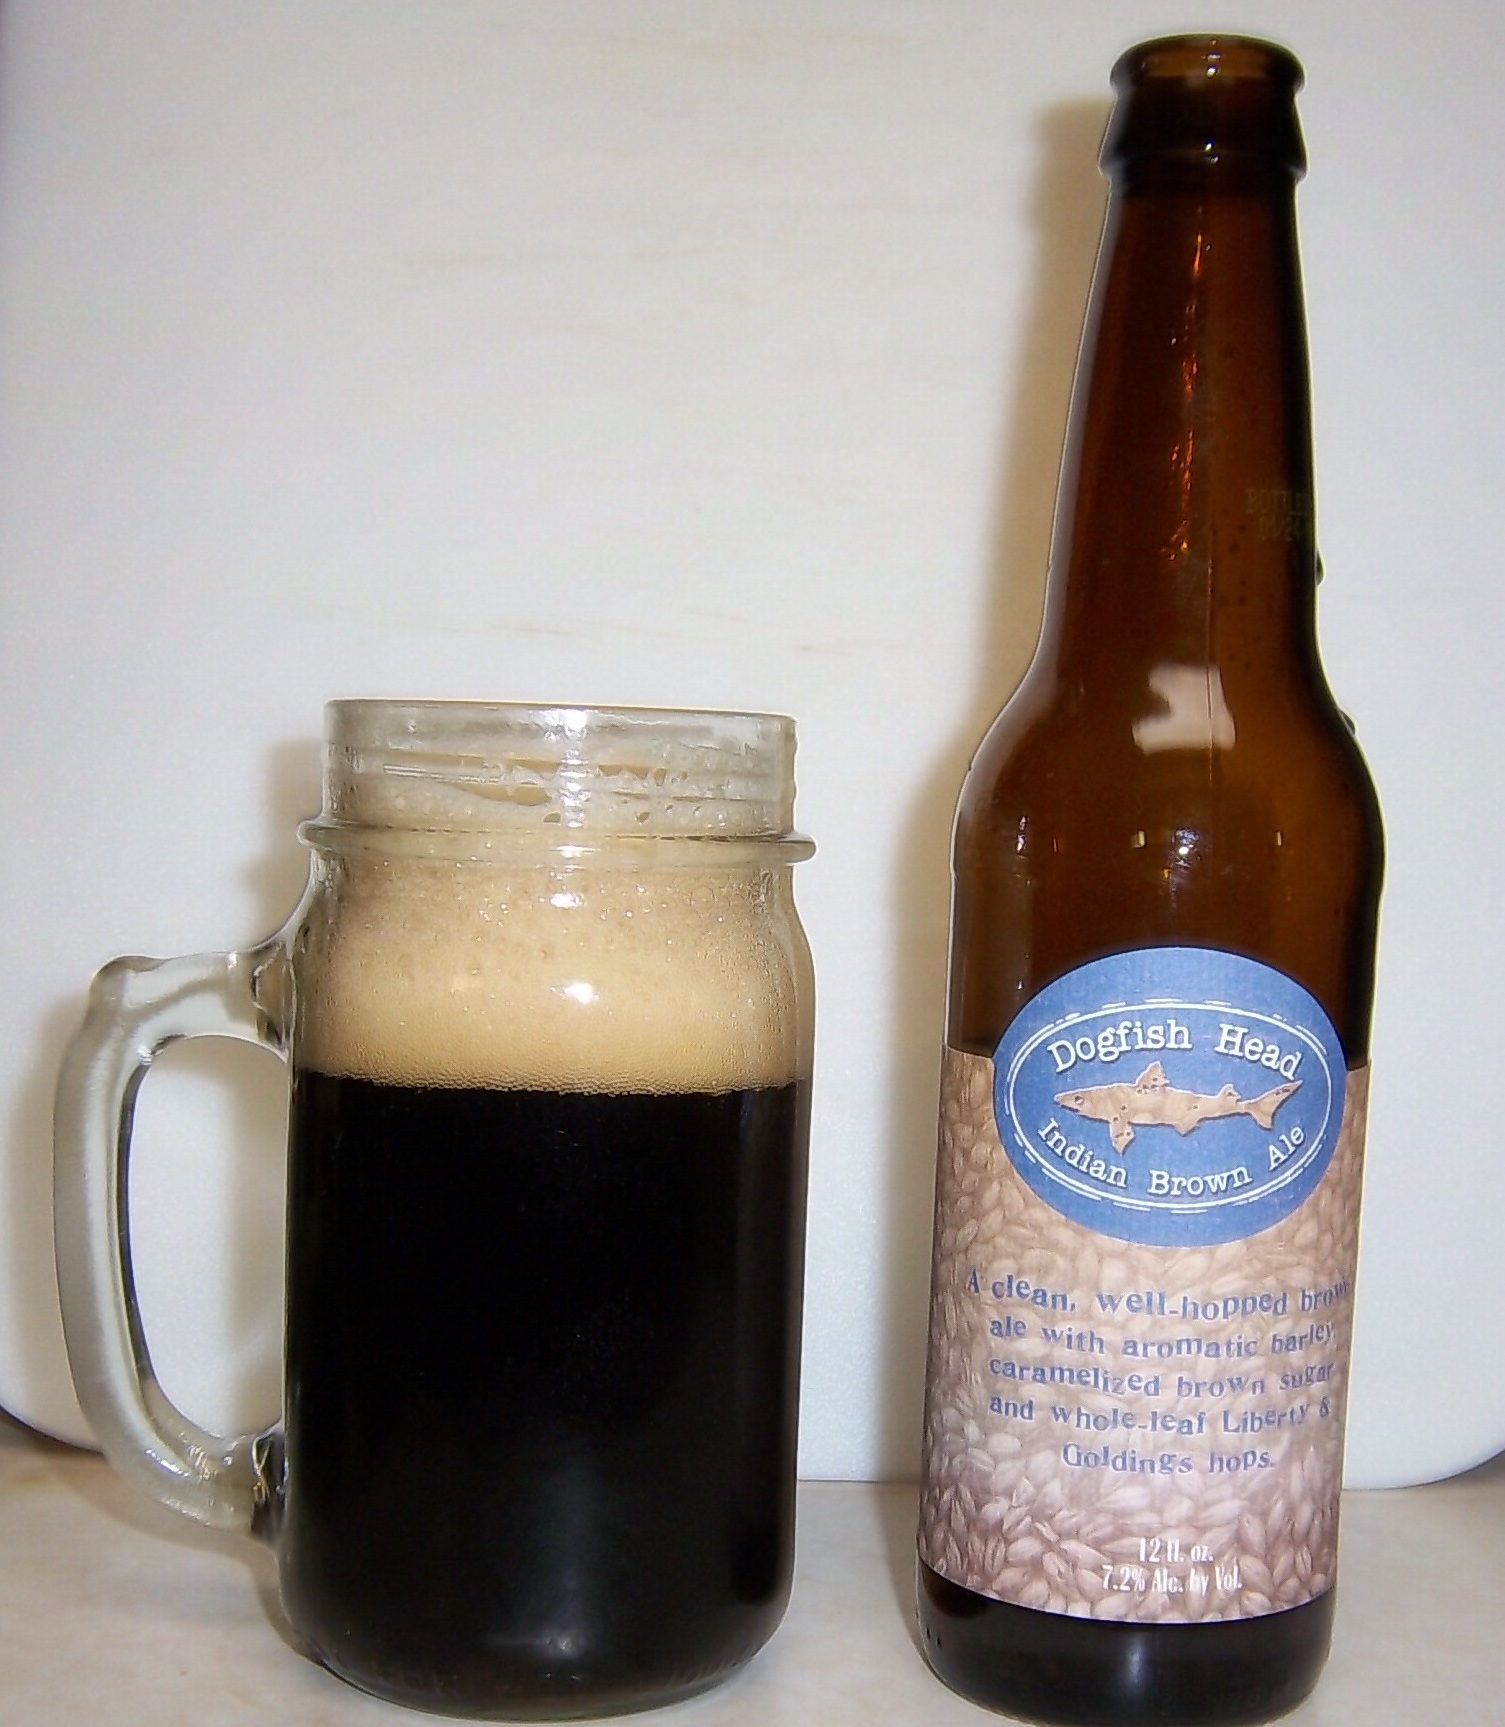 Dogfish+head+indian+brown+ale+calories